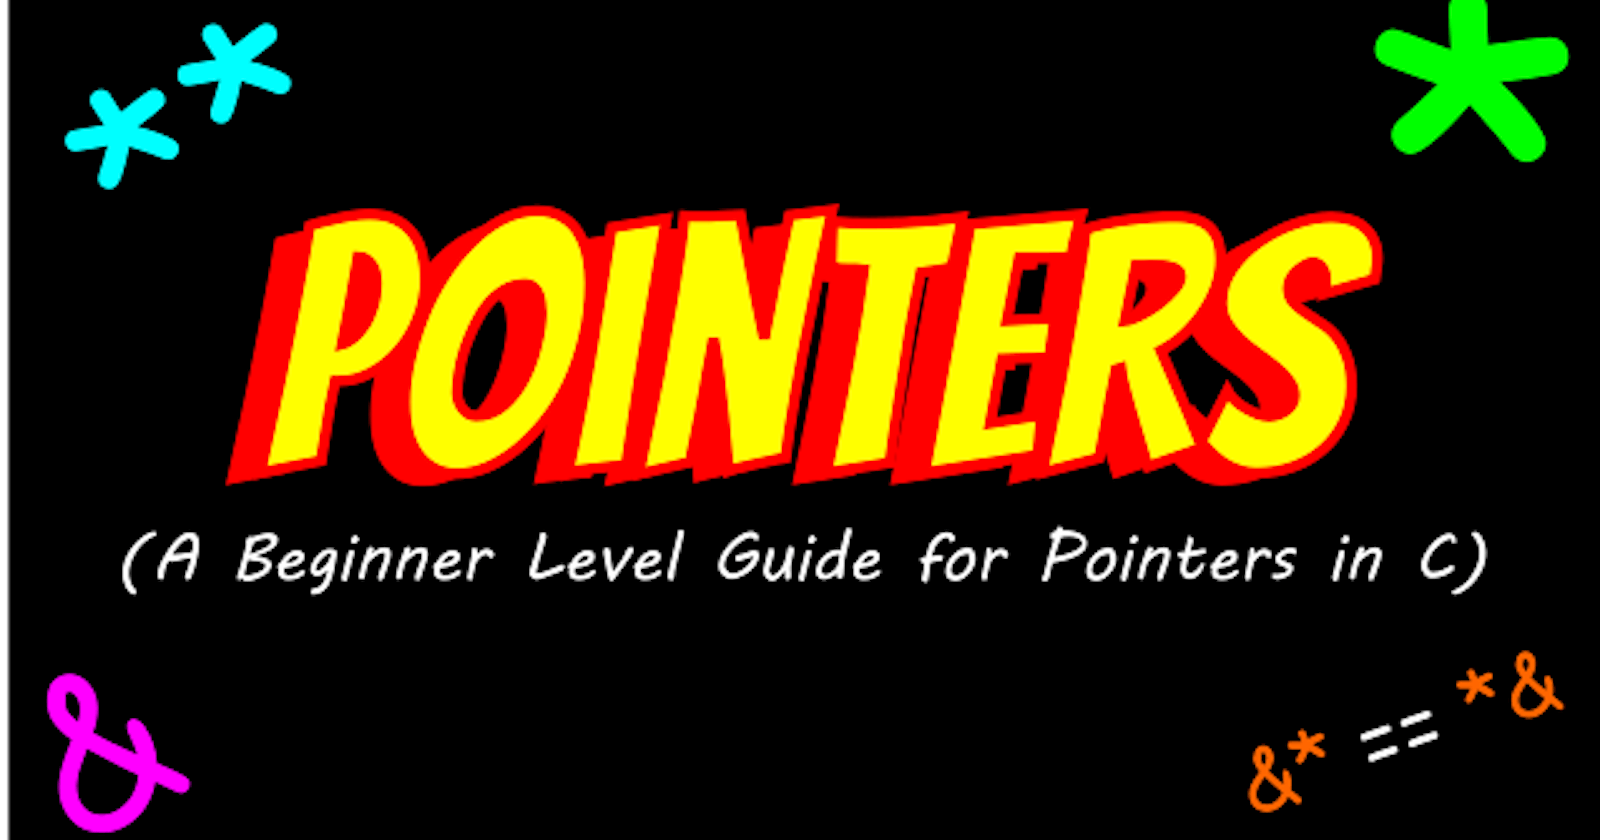 A Complete Guide to Learn Pointers in C